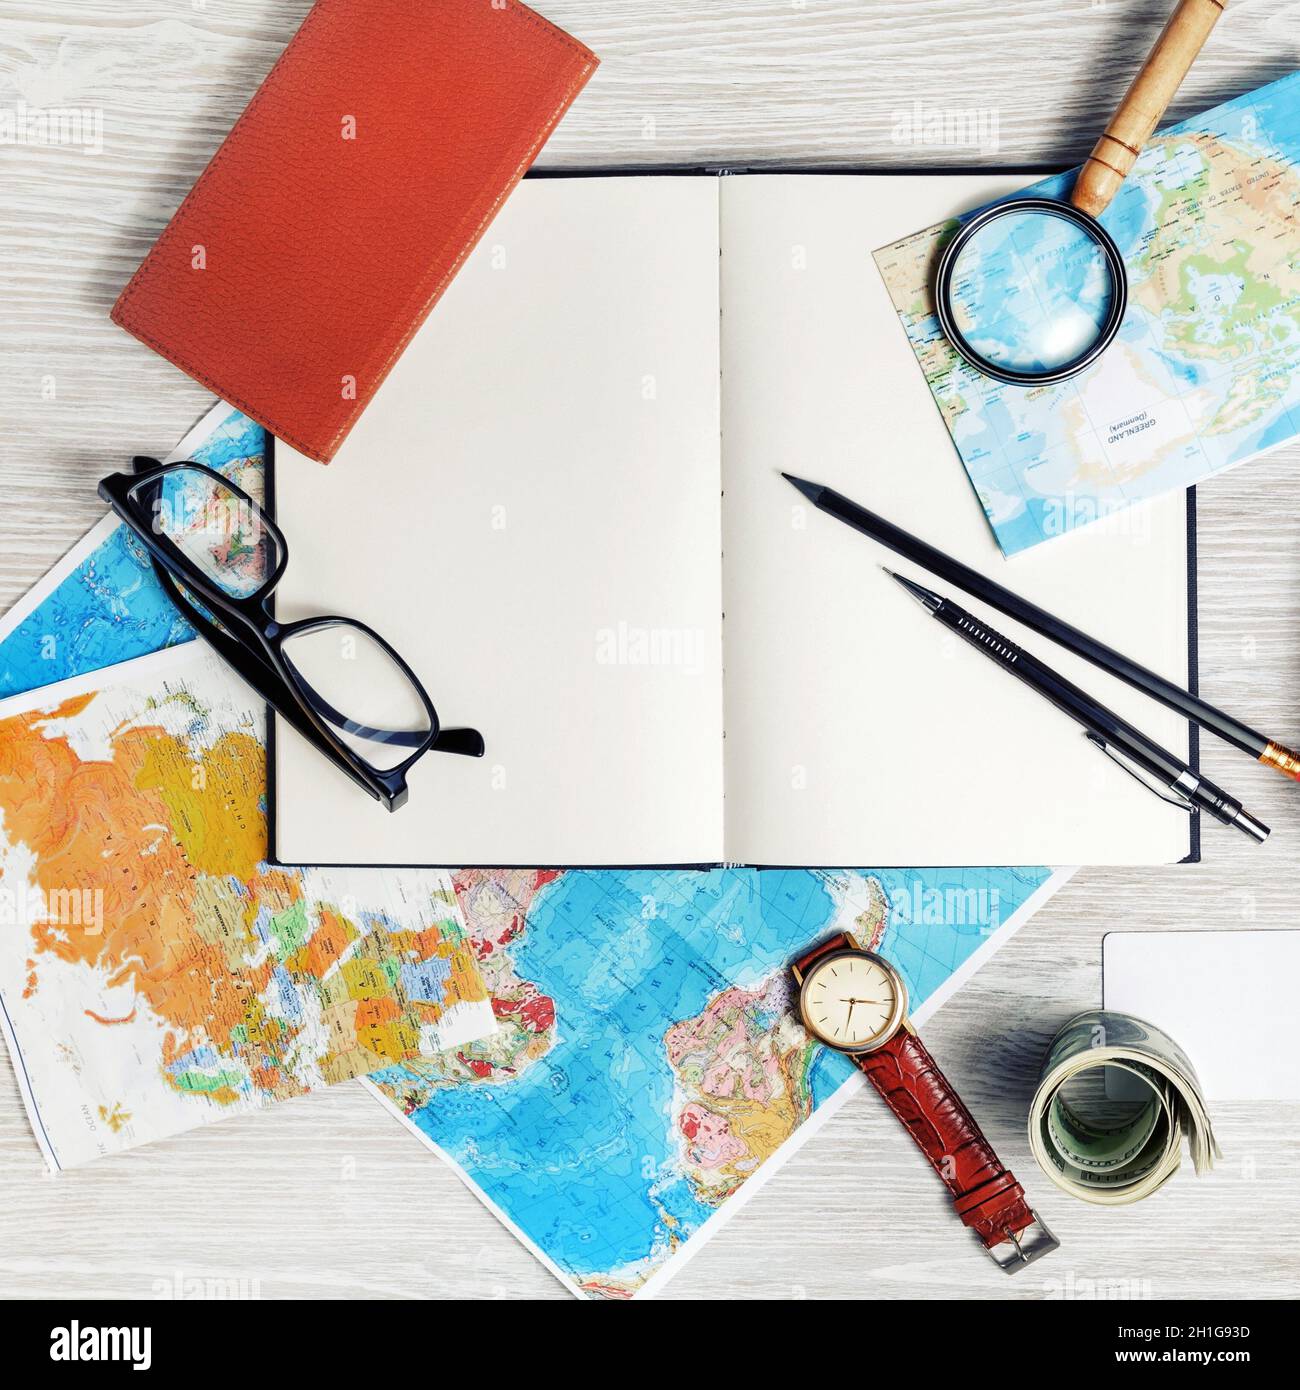 Making travel plan. Map, blank book, magnifier, glasses, notebook, pencils, clock and money. Top view. Flat lay. Stock Photo